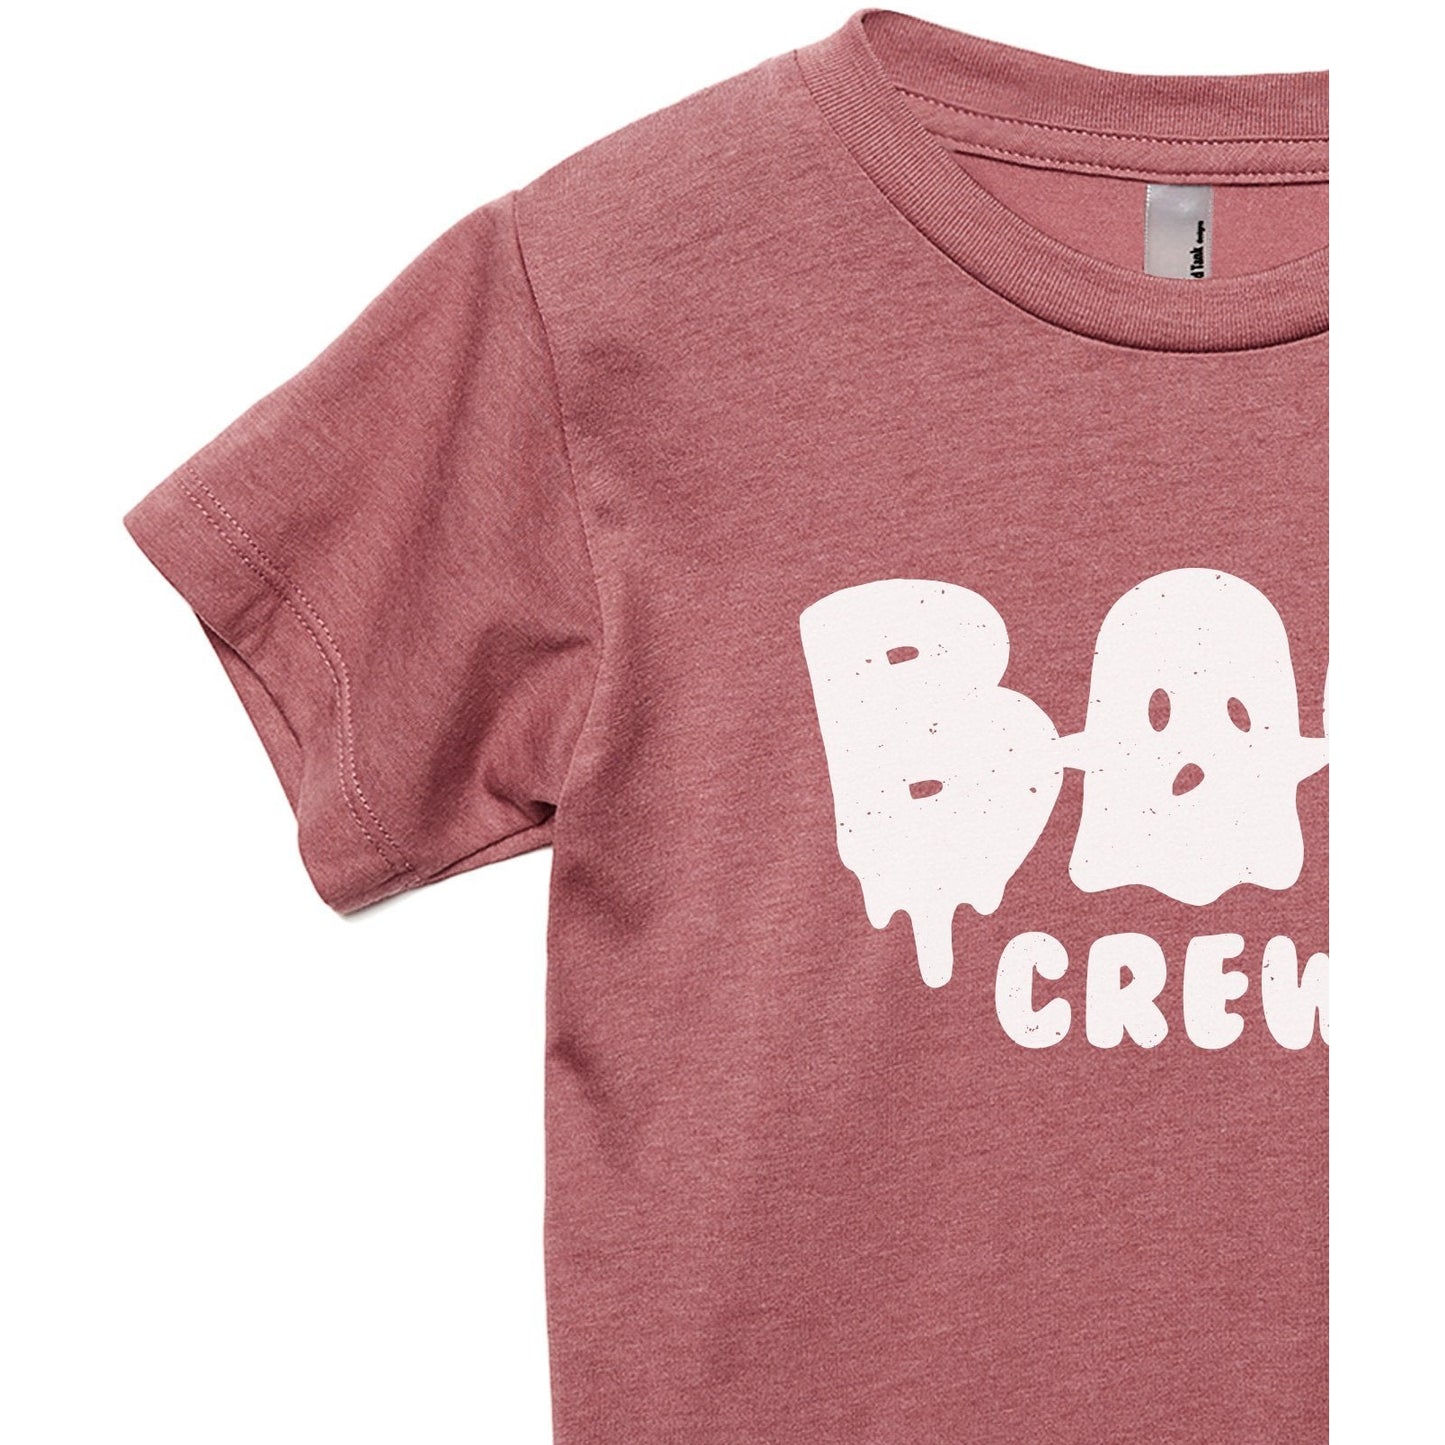 Boo Crew Toddler's Go-To Crewneck Tee Heather Grey Close Up Sleeves Collar Details
